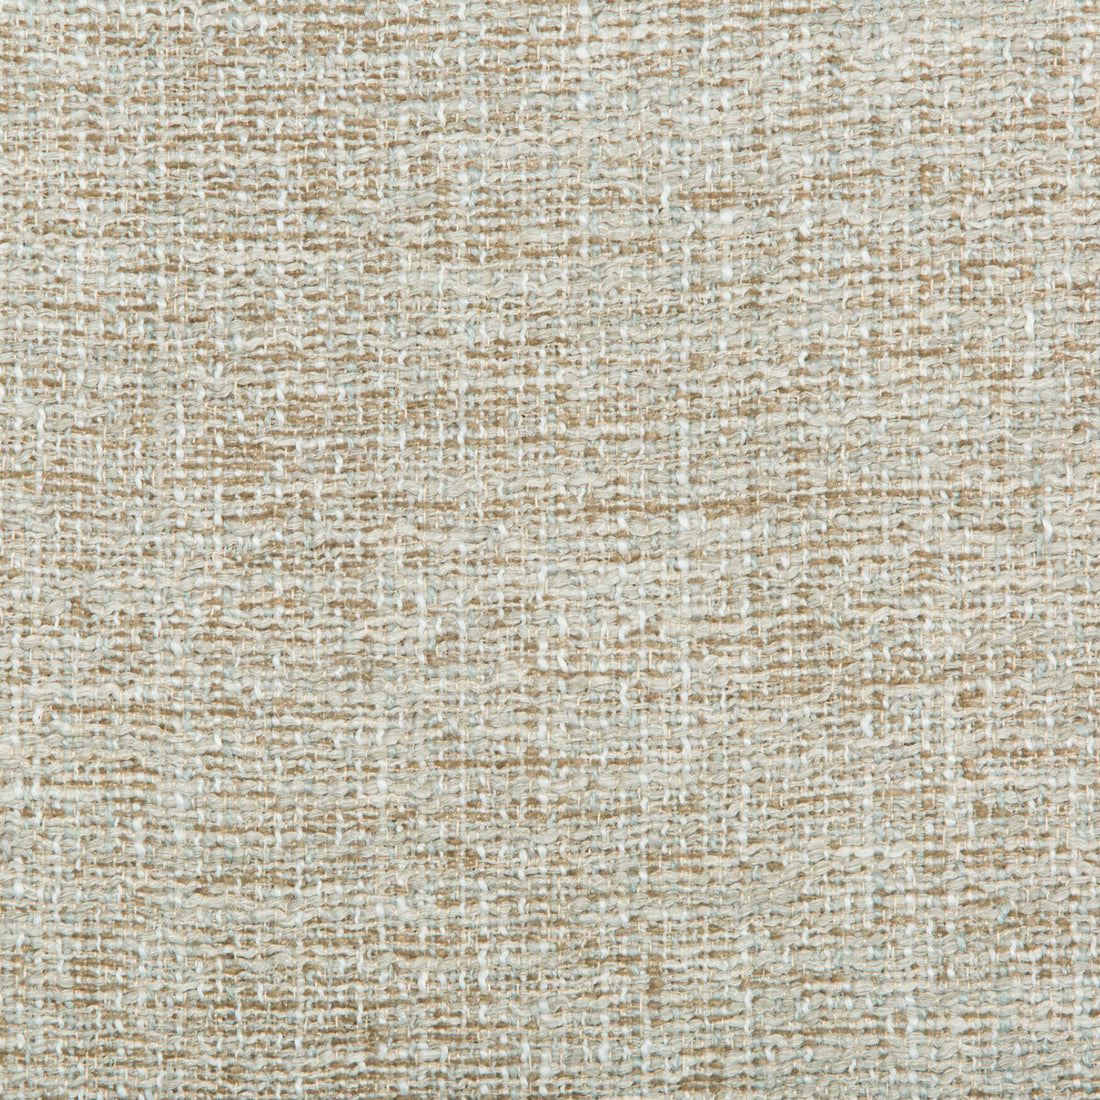 Shelbi fabric in silver color - pattern 34252.16.0 - by Kravet Couture in the David Phoenix Well-Suited collection